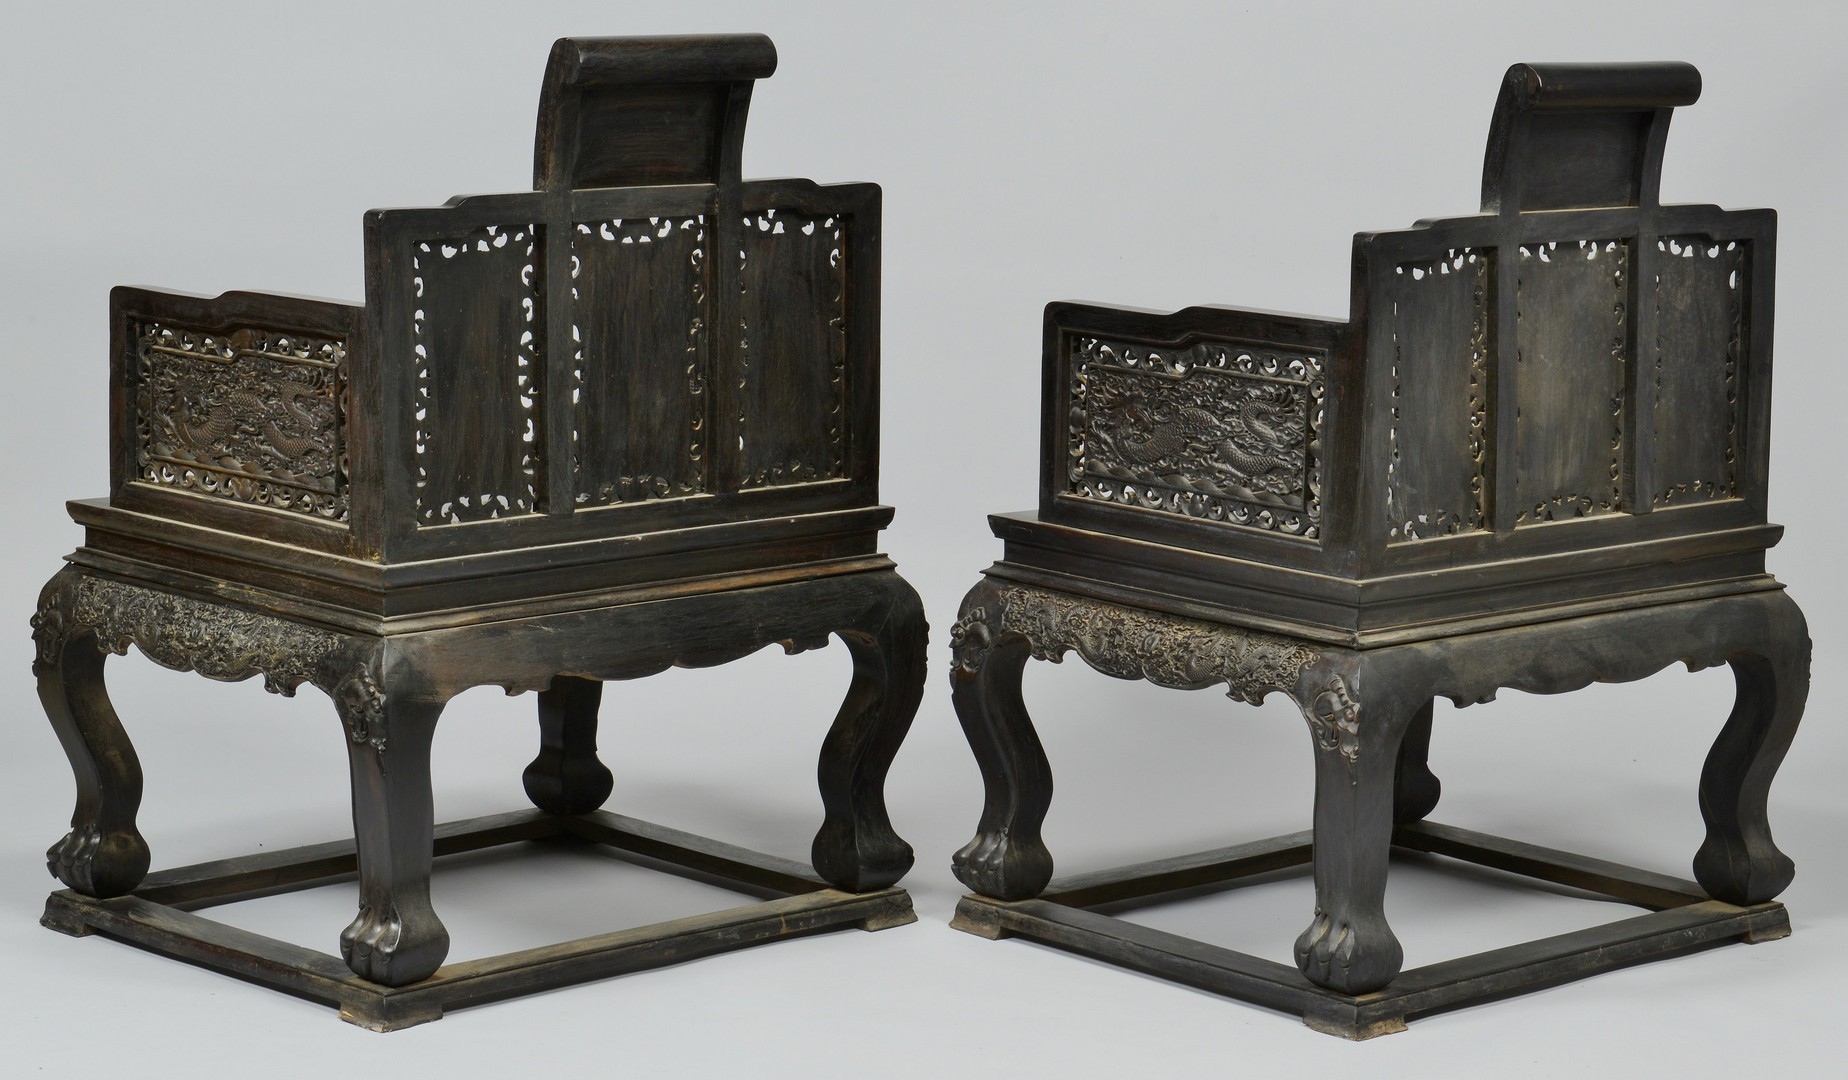 Lot 32: Pair of Chinese Hardwood Throne Form Armchairs, Modern